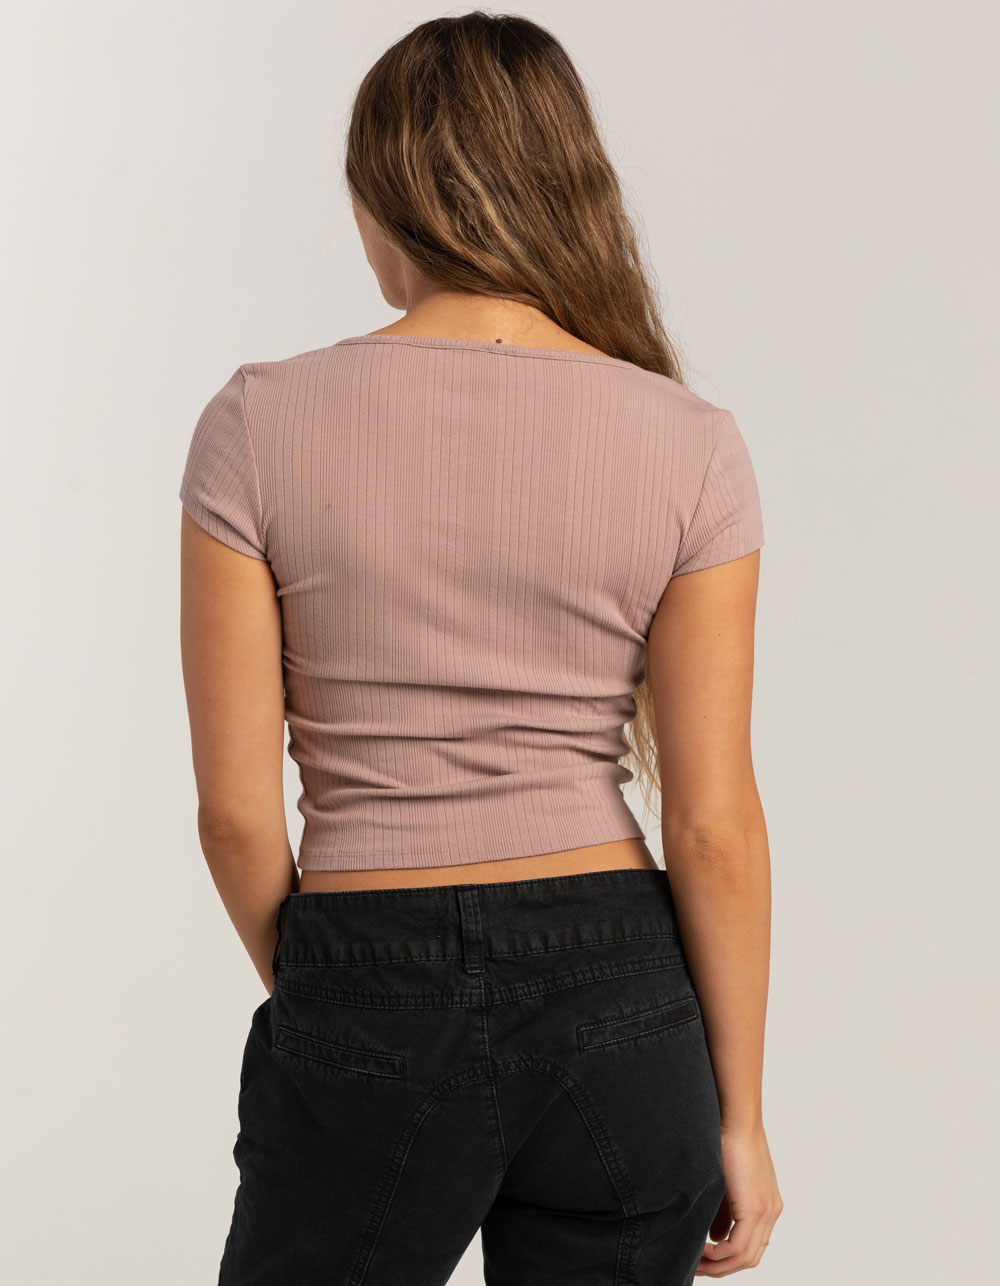 BDG Urban Outfitters Button Notch Neck Womens Top - PINK